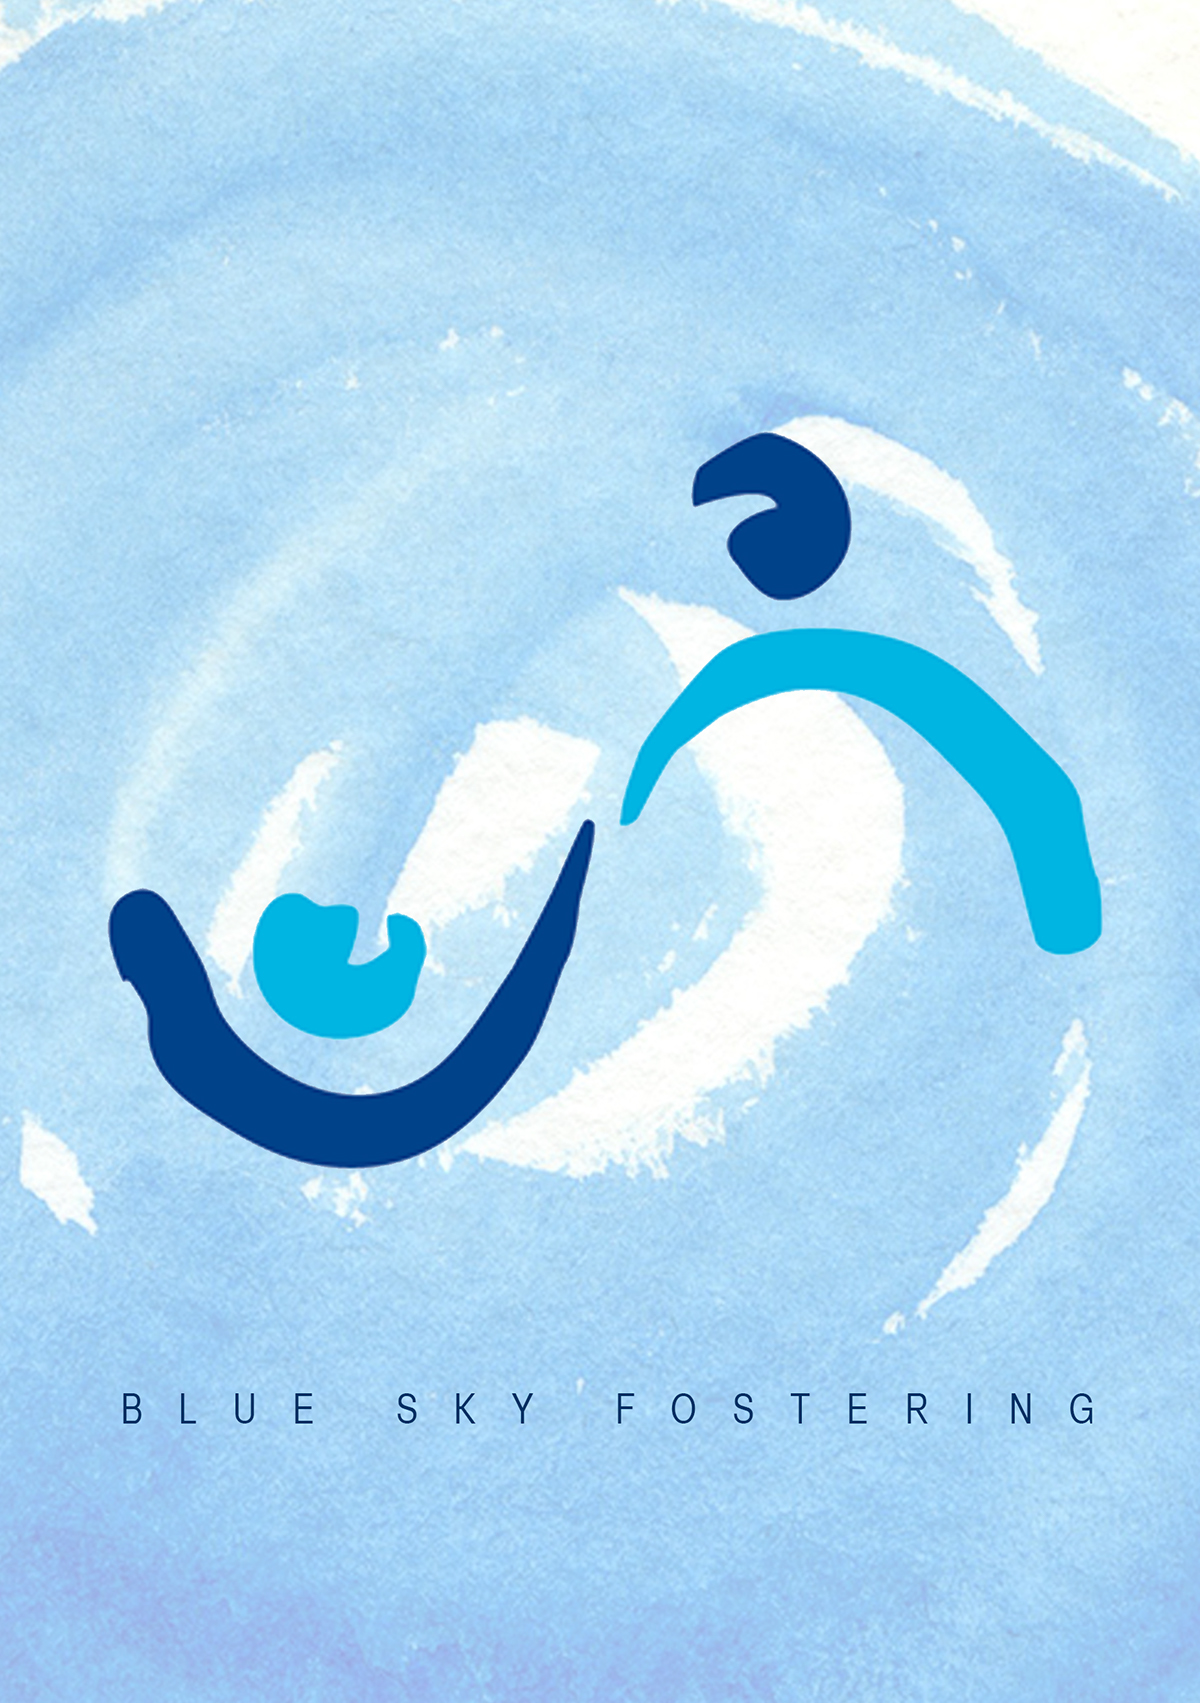 Blue Sky Fostering Foster Romsey Southampton Hero copy super care childcare children teenager